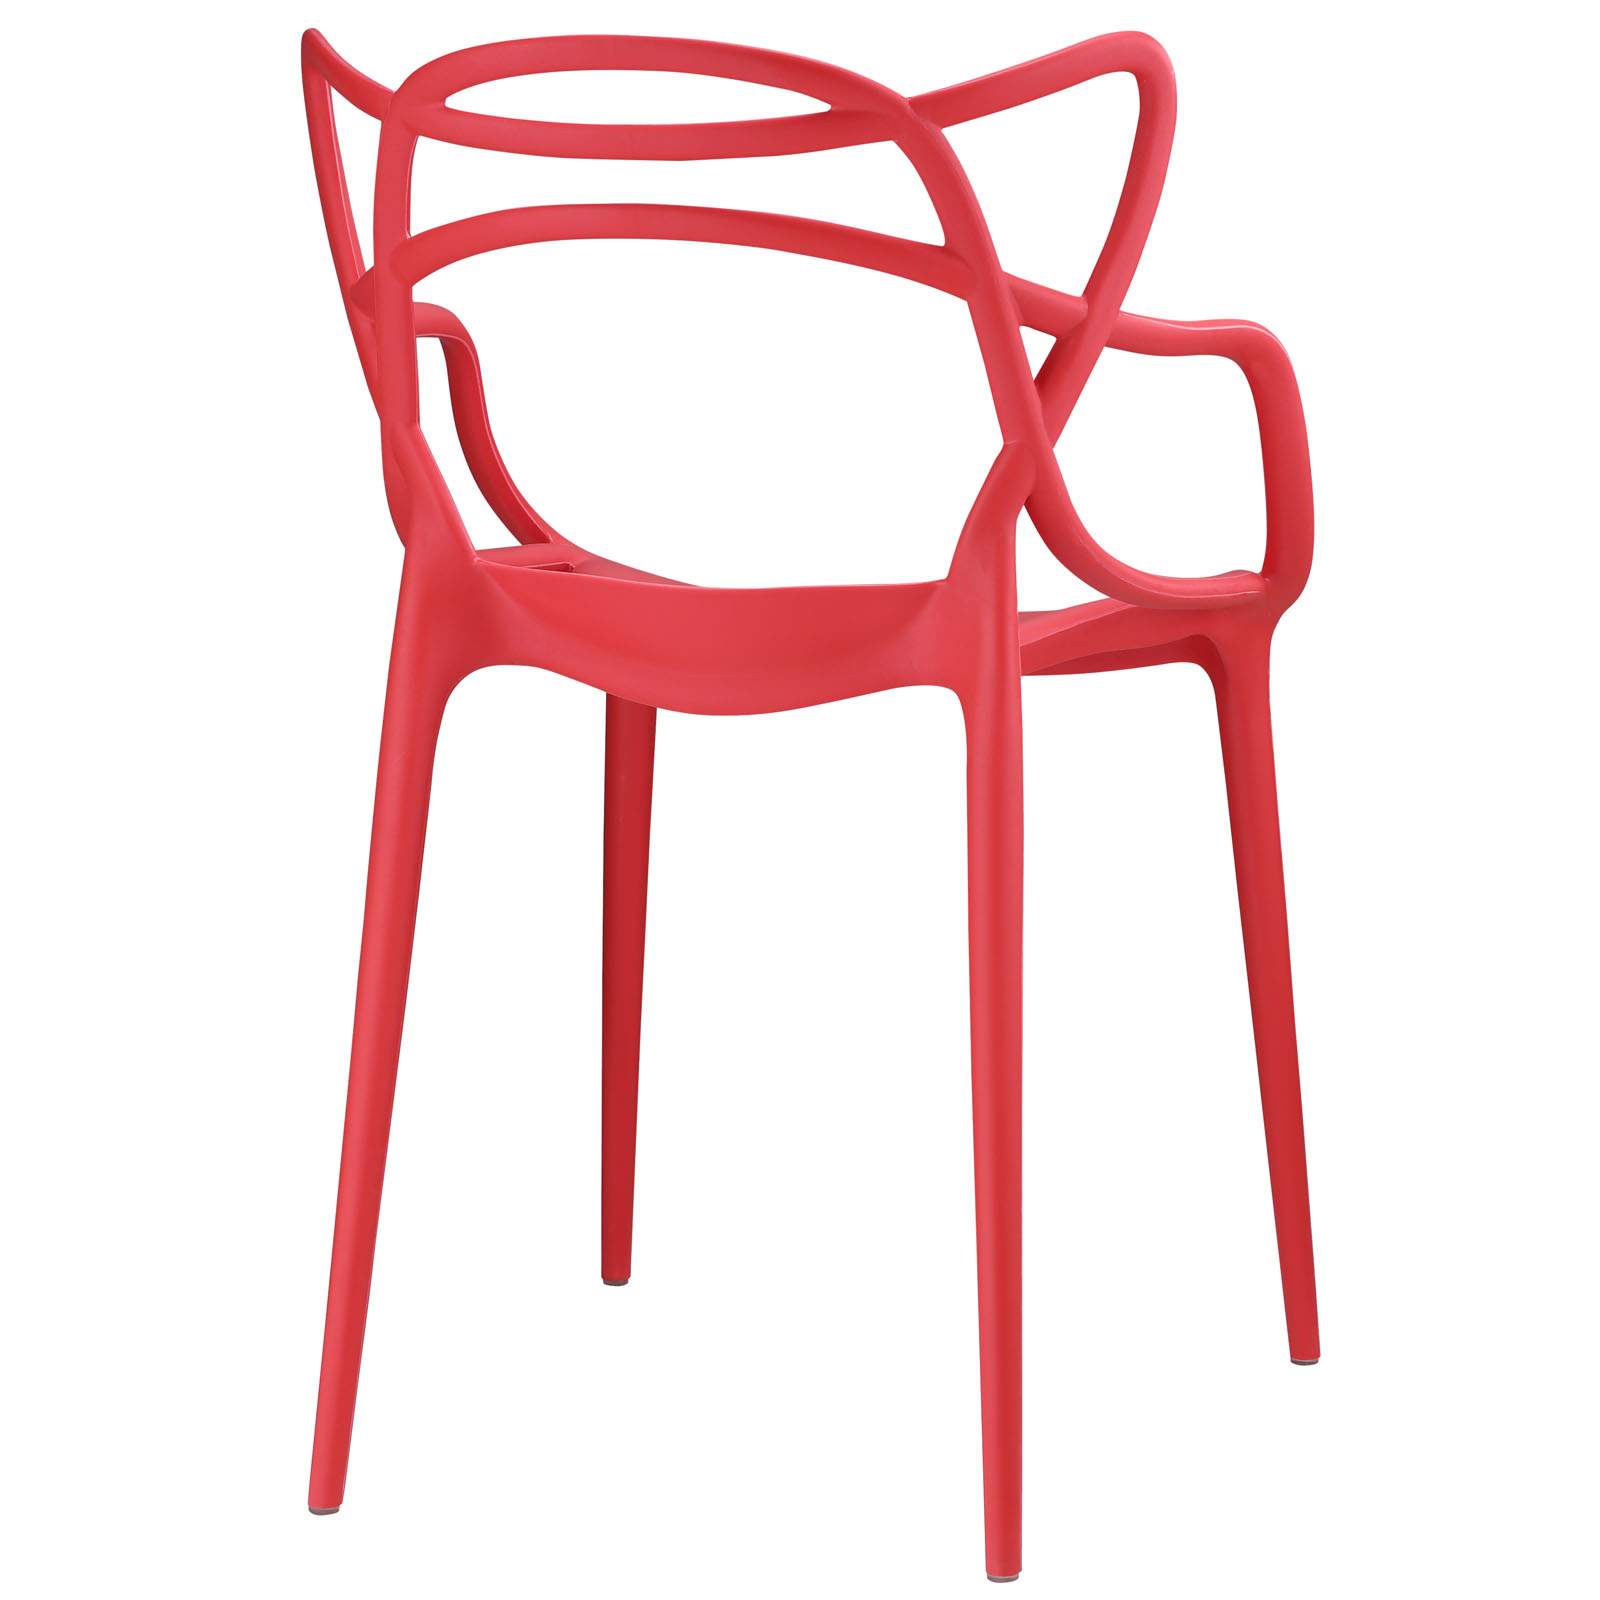 Modern Contemporary Urban Design Outdoor Kitchen Room Dining Chair Set ( Set of Two), Red, Plastic - image 4 of 4